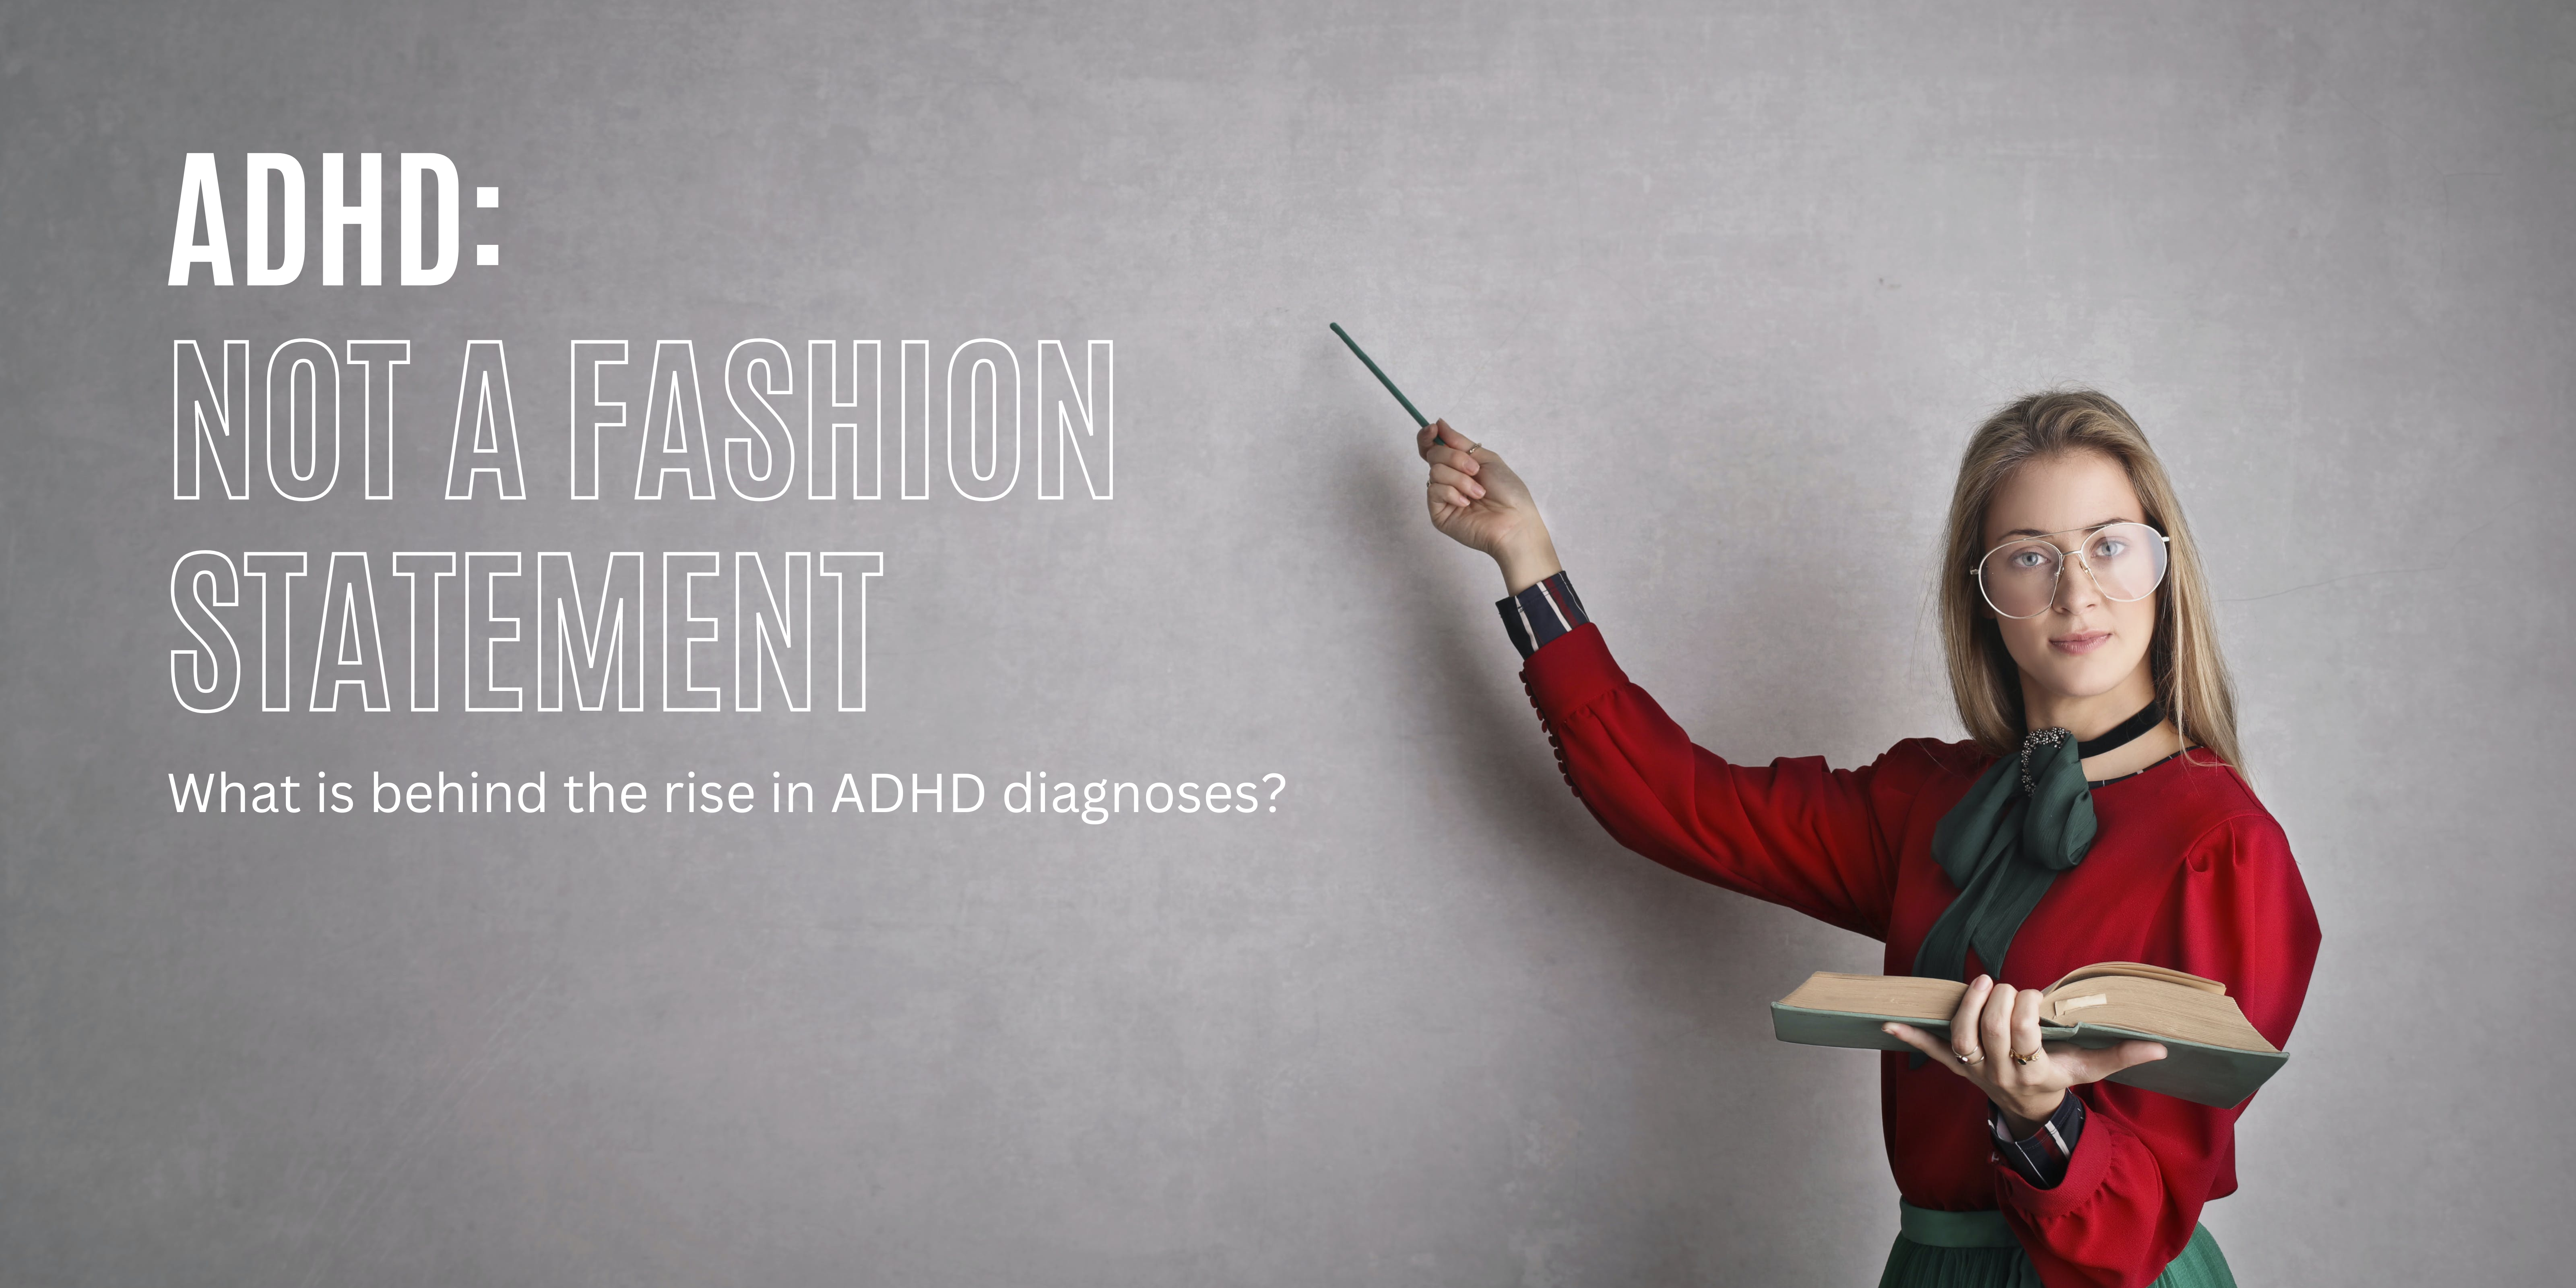 What is behind the rise in ADHD diagnoses?